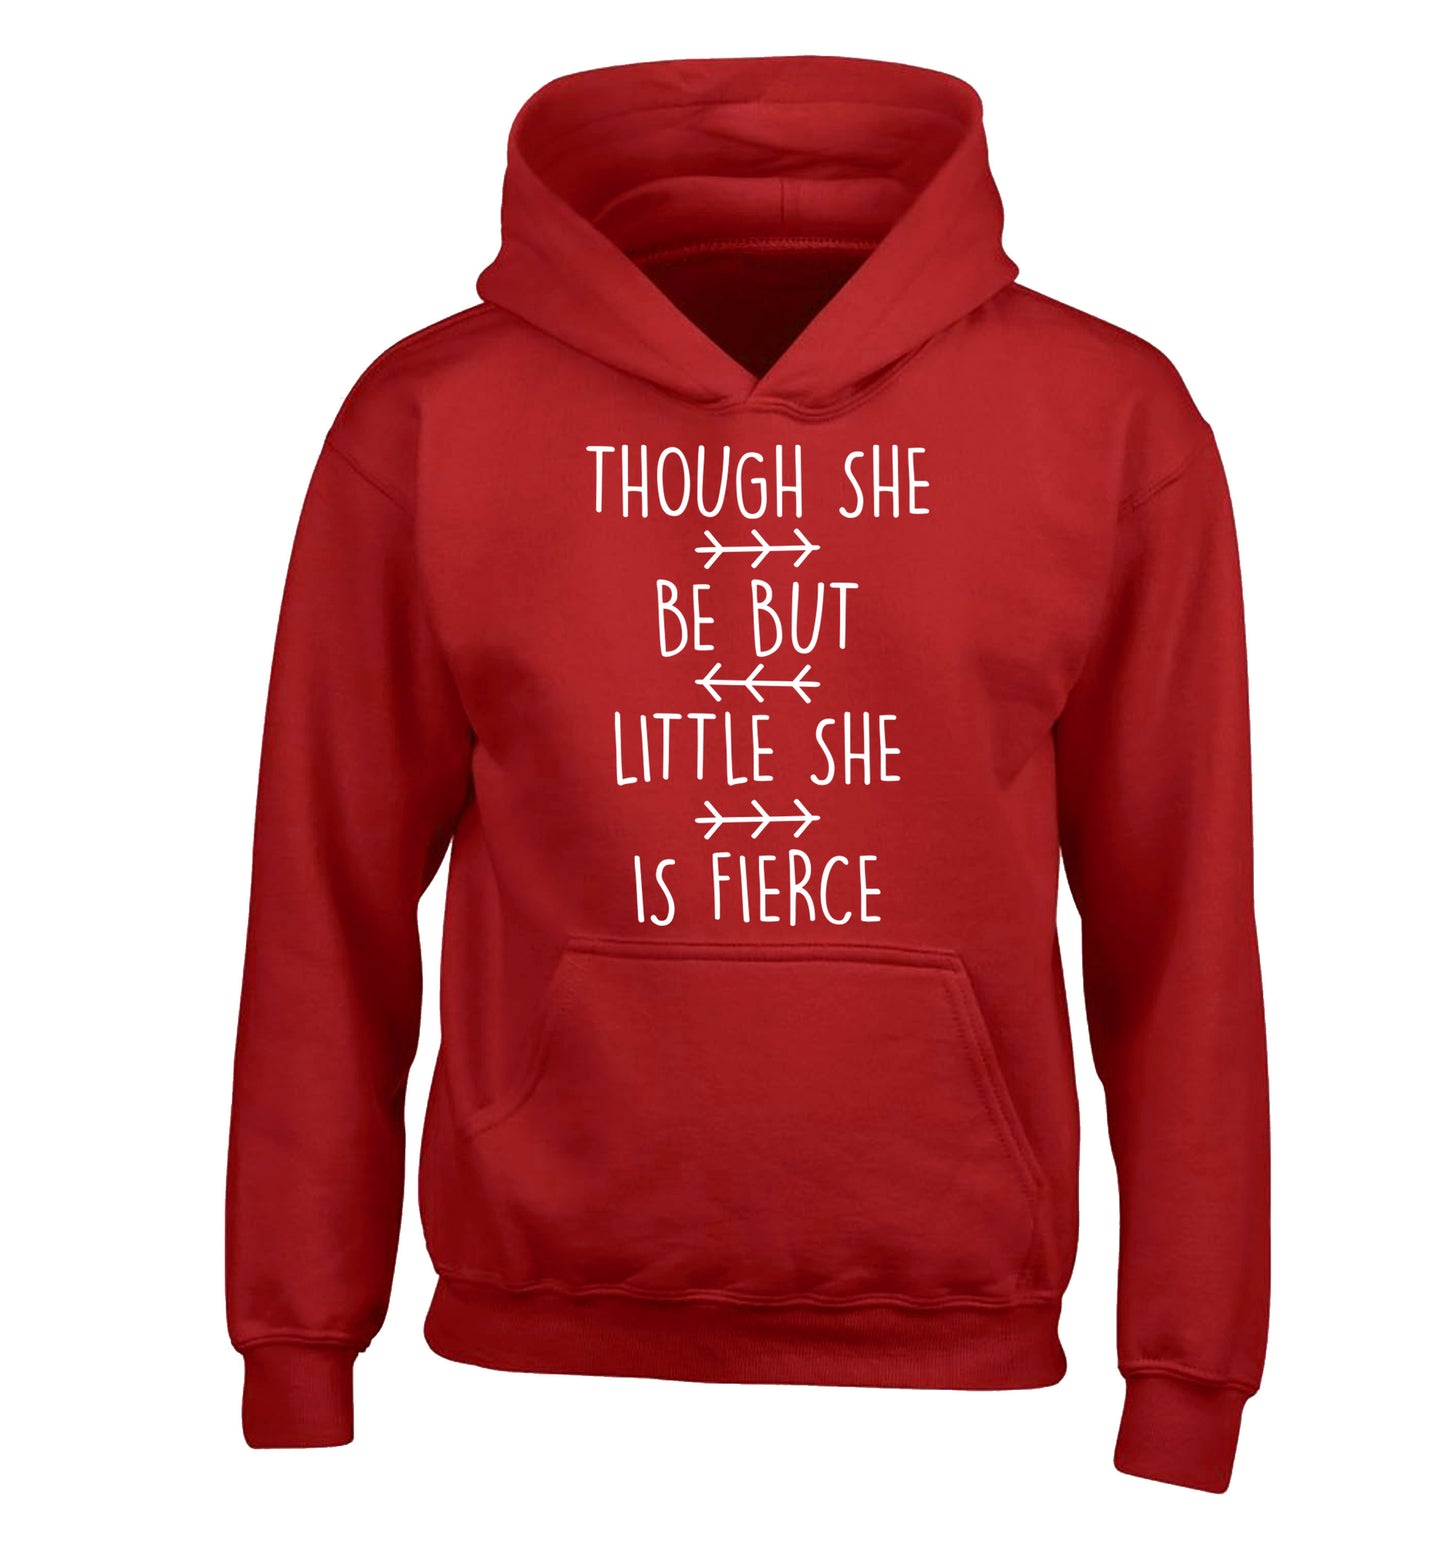 Though she be little she be fierce children's red hoodie 12-14 Years